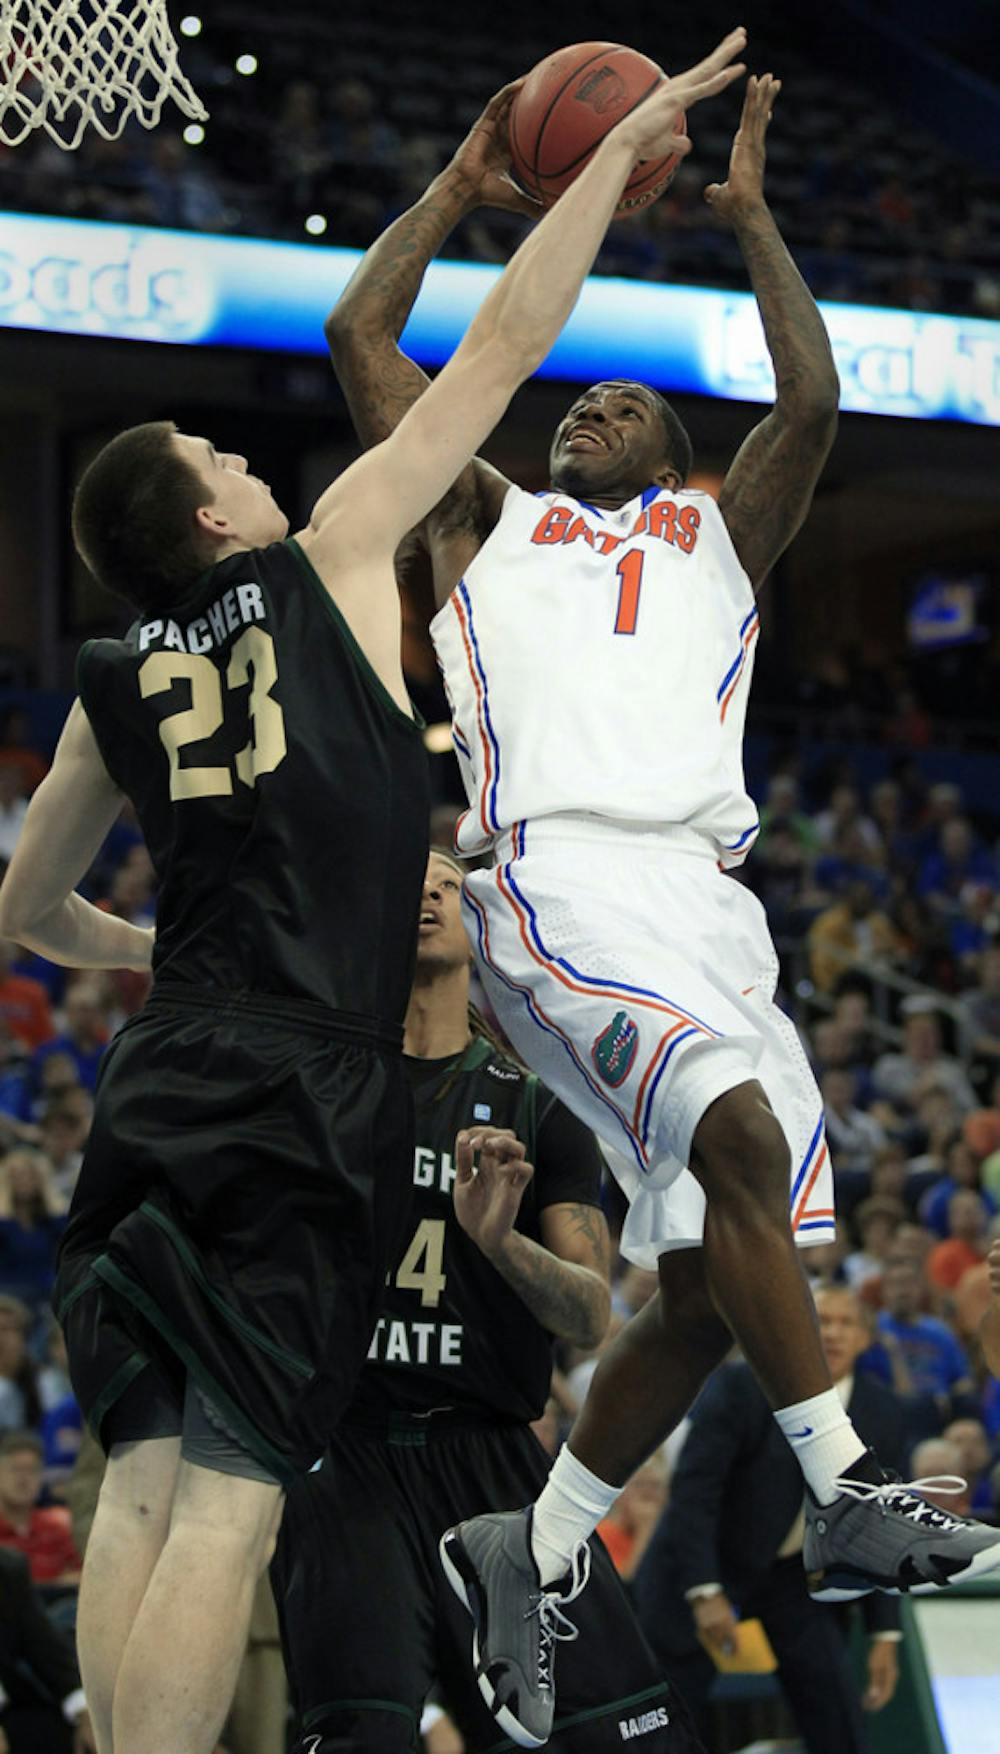 <p>Florida junior guard Kenny Boynton scored 22 points Monday off a
game-high six 3-pointers in a 78-65 win against Wright State.</p>